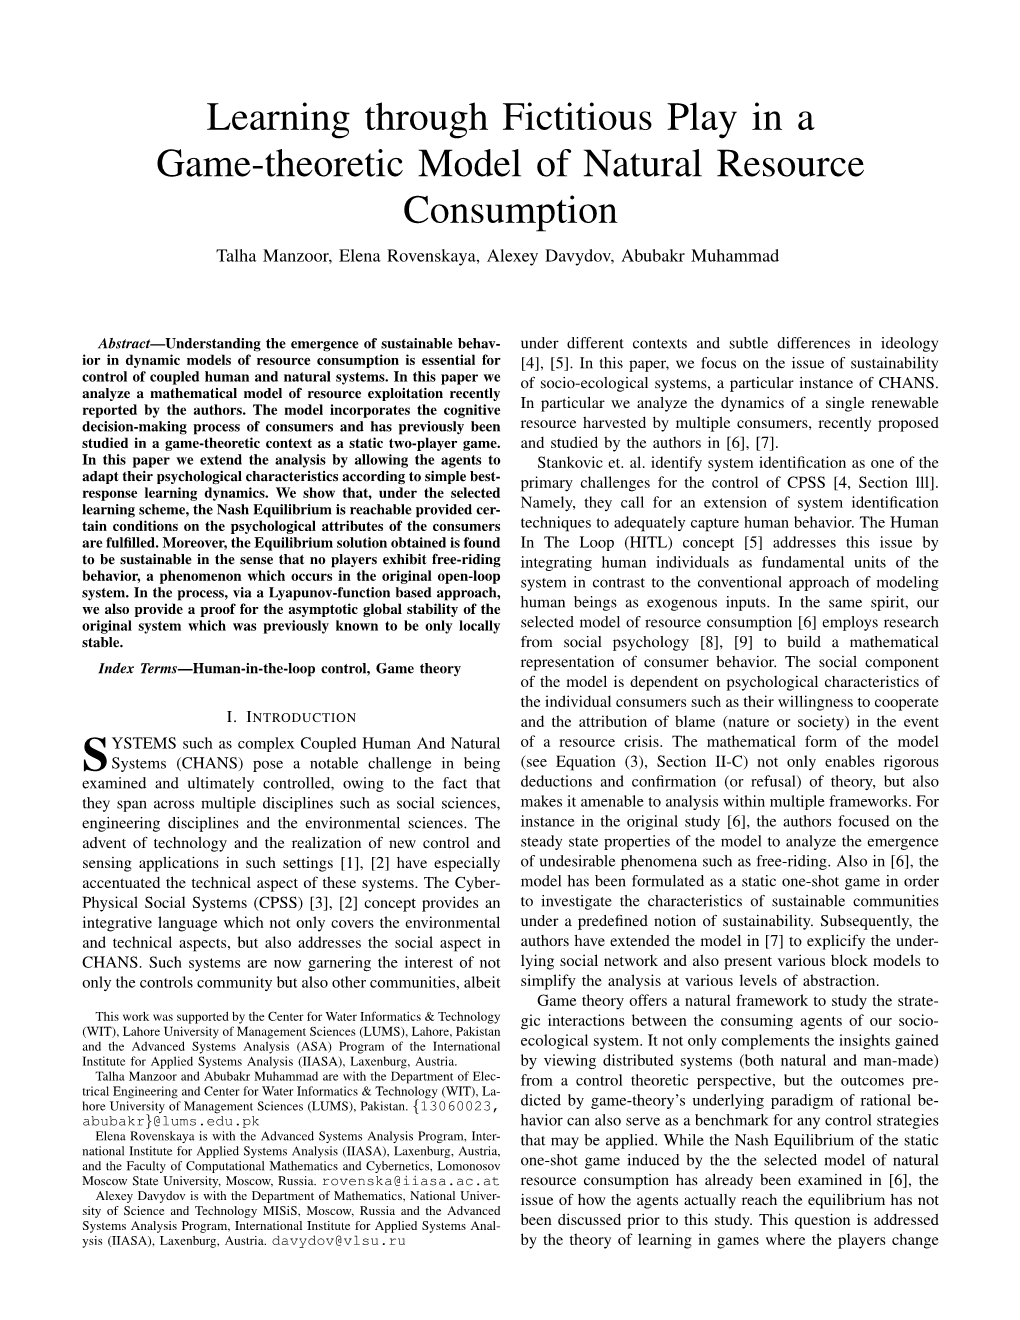 Learning Through Fictitious Play in a Game-Theoretic Model of Natural Resource Consumption Talha Manzoor, Elena Rovenskaya, Alexey Davydov, Abubakr Muhammad